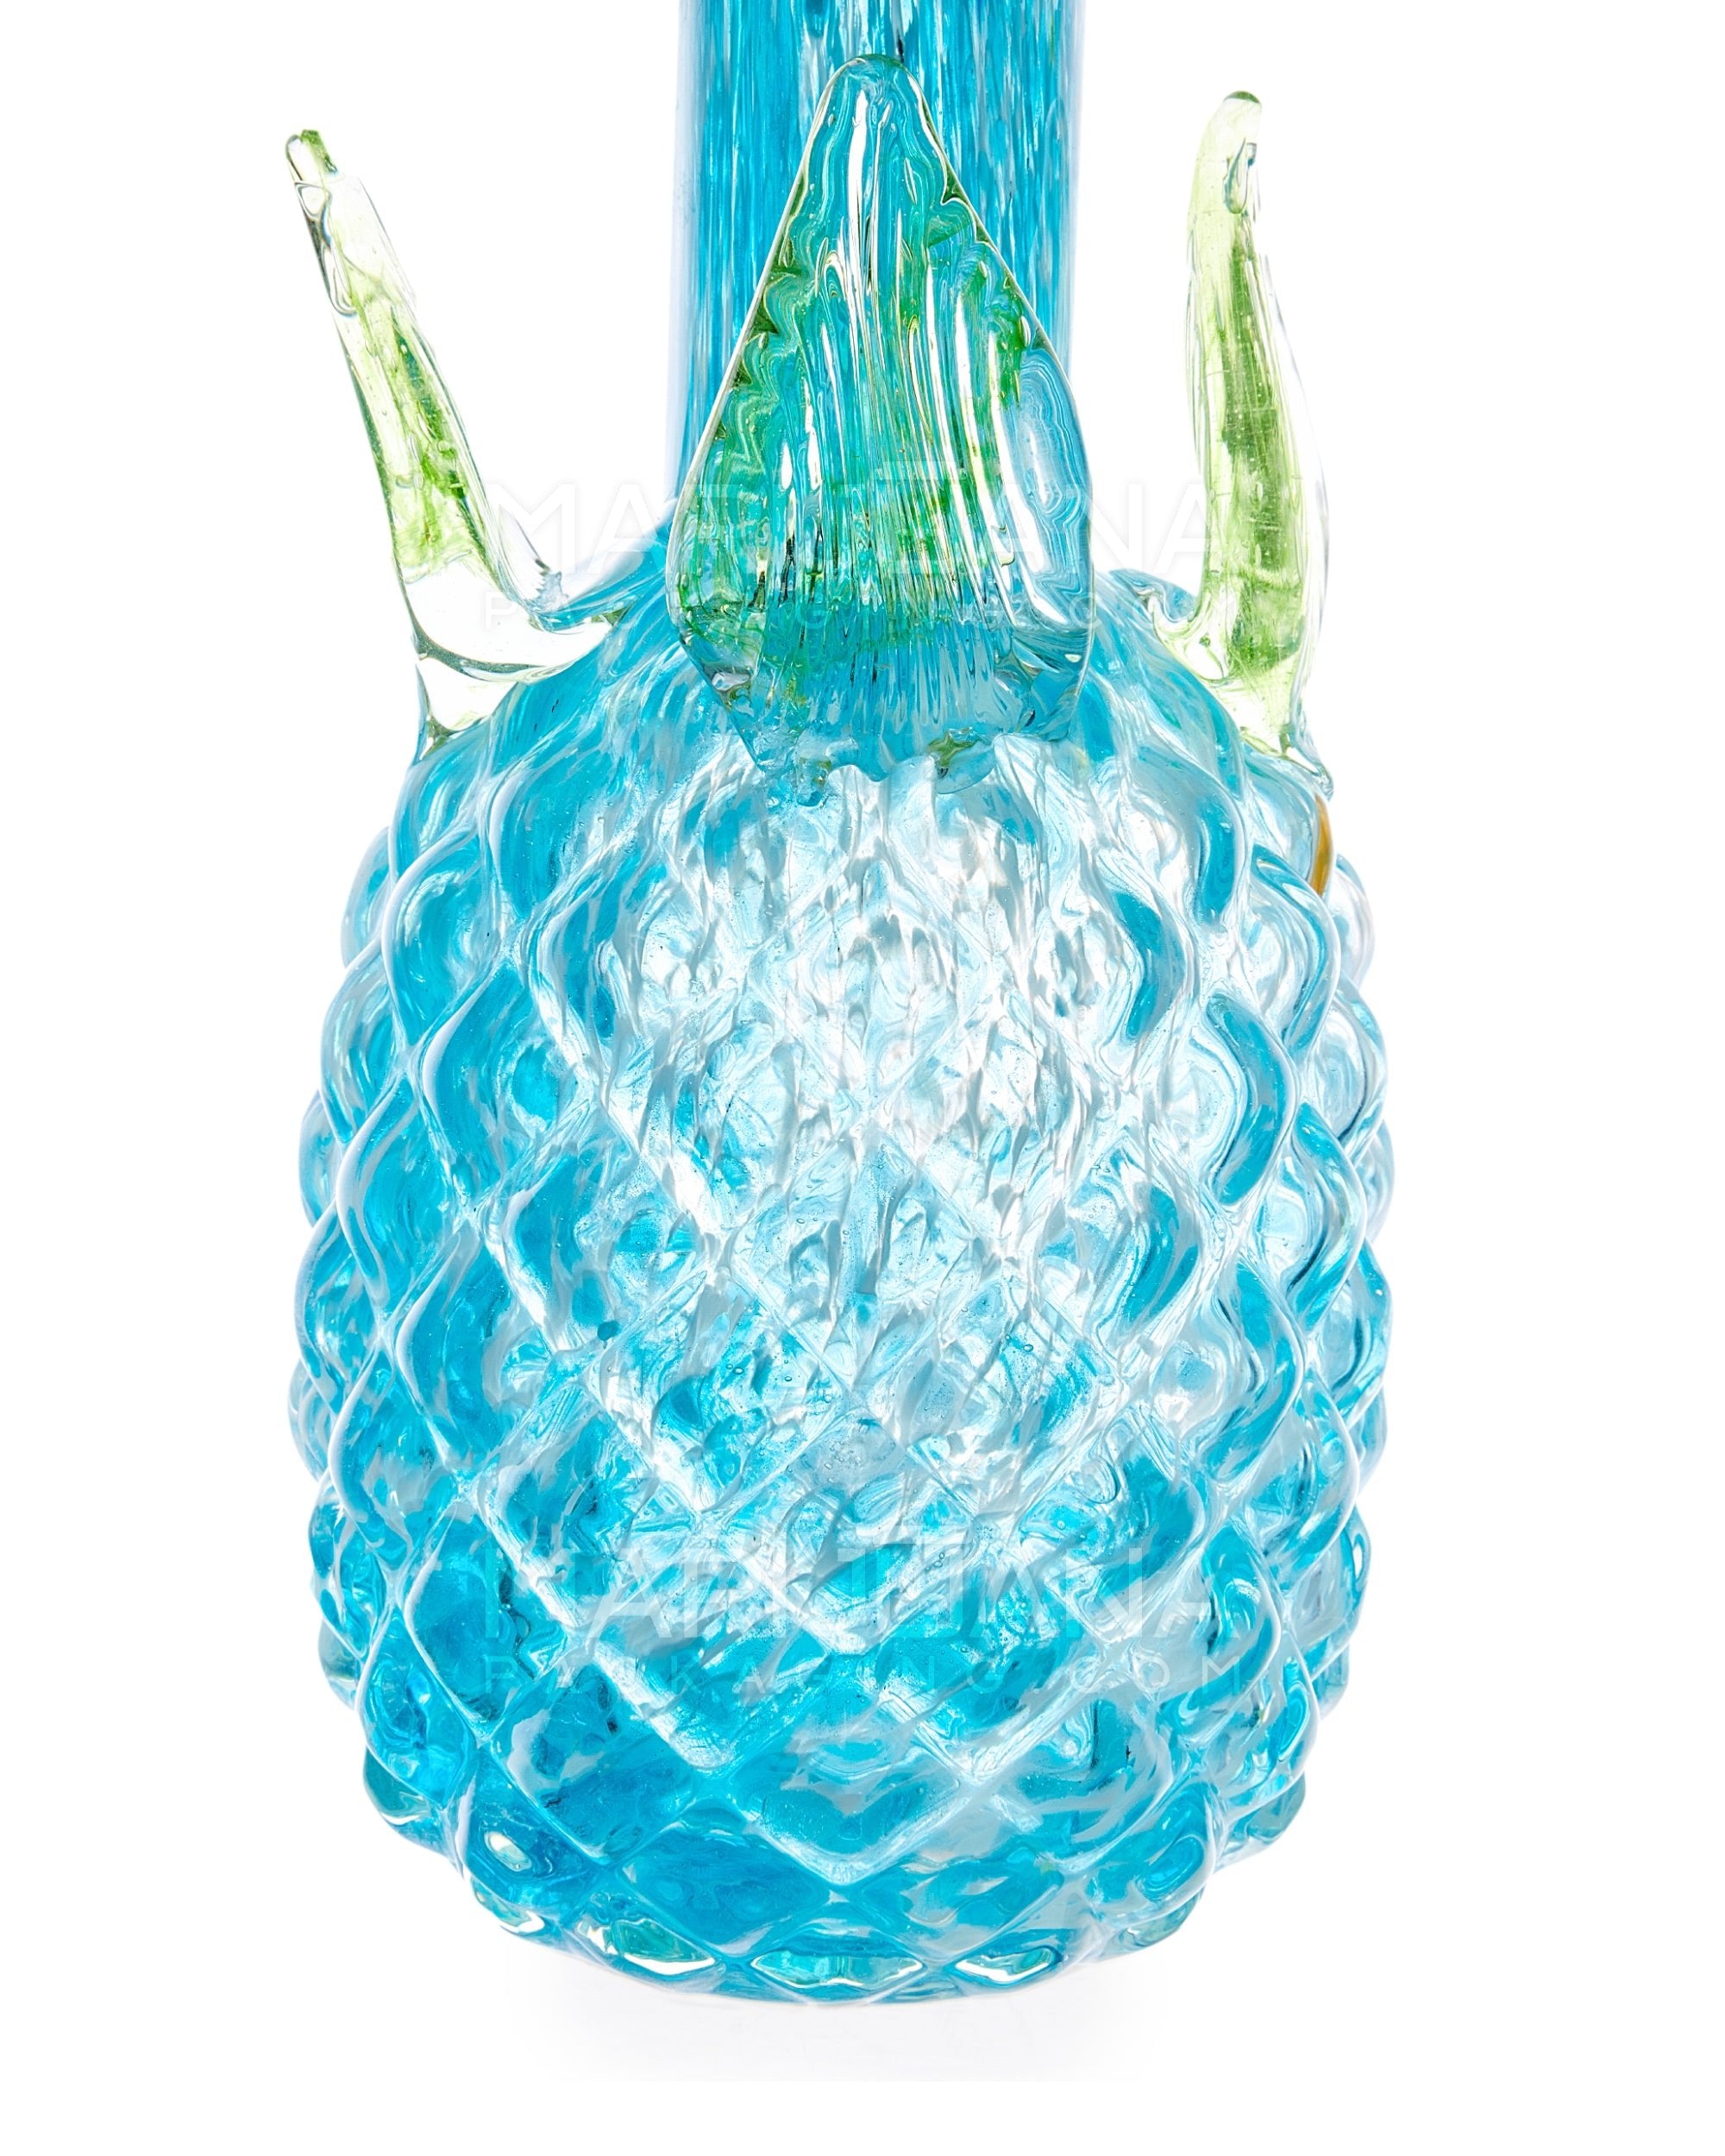 Straight Neck Color Pull Pineapple Glass Water Pipe | 14in Tall - 14mm Bowl - Blue - 3